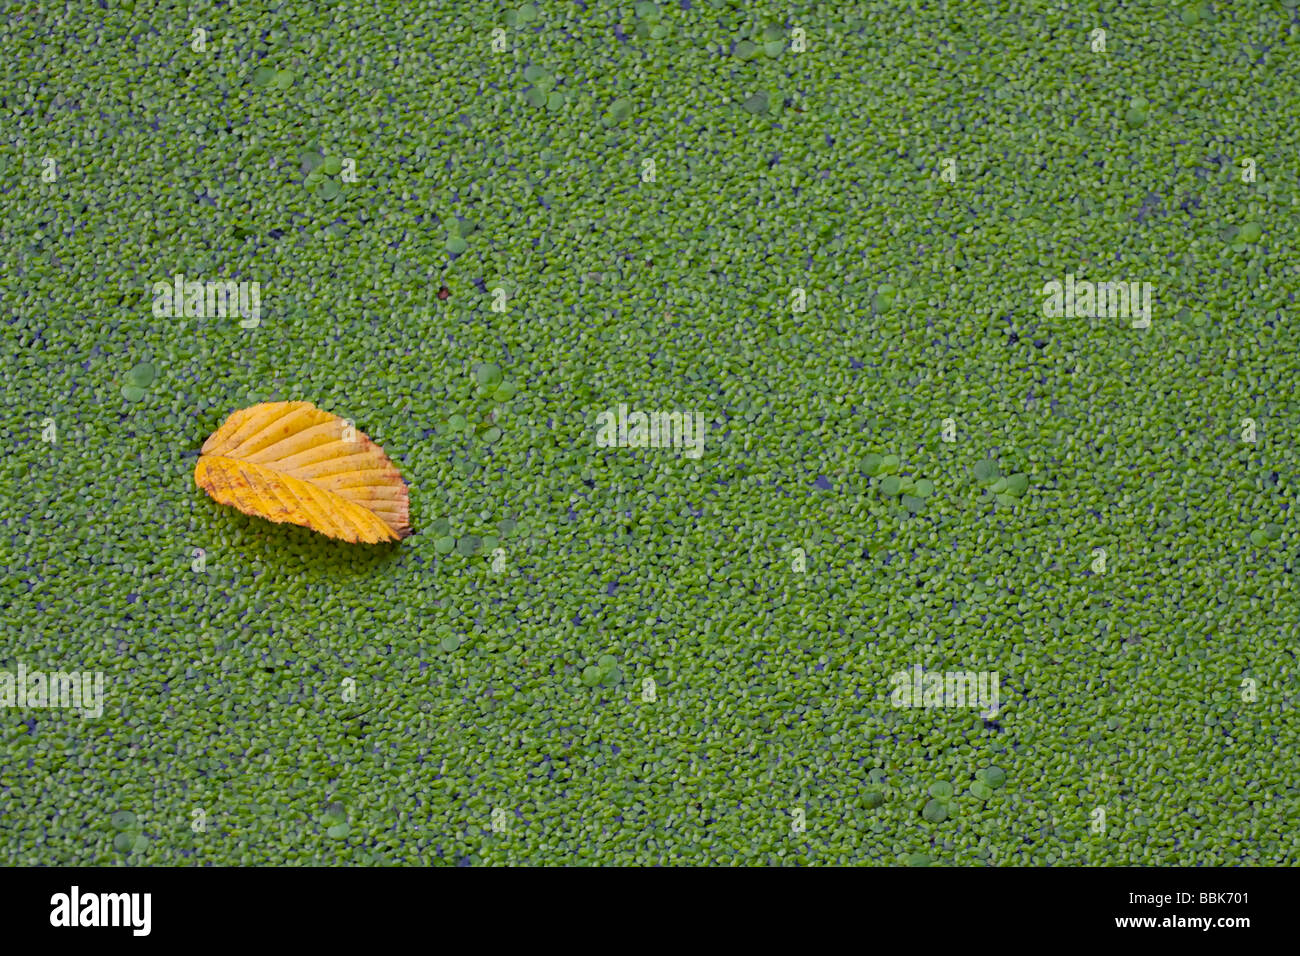 Solitary yellow leaf on a bed of green duckweed. Stock Photo